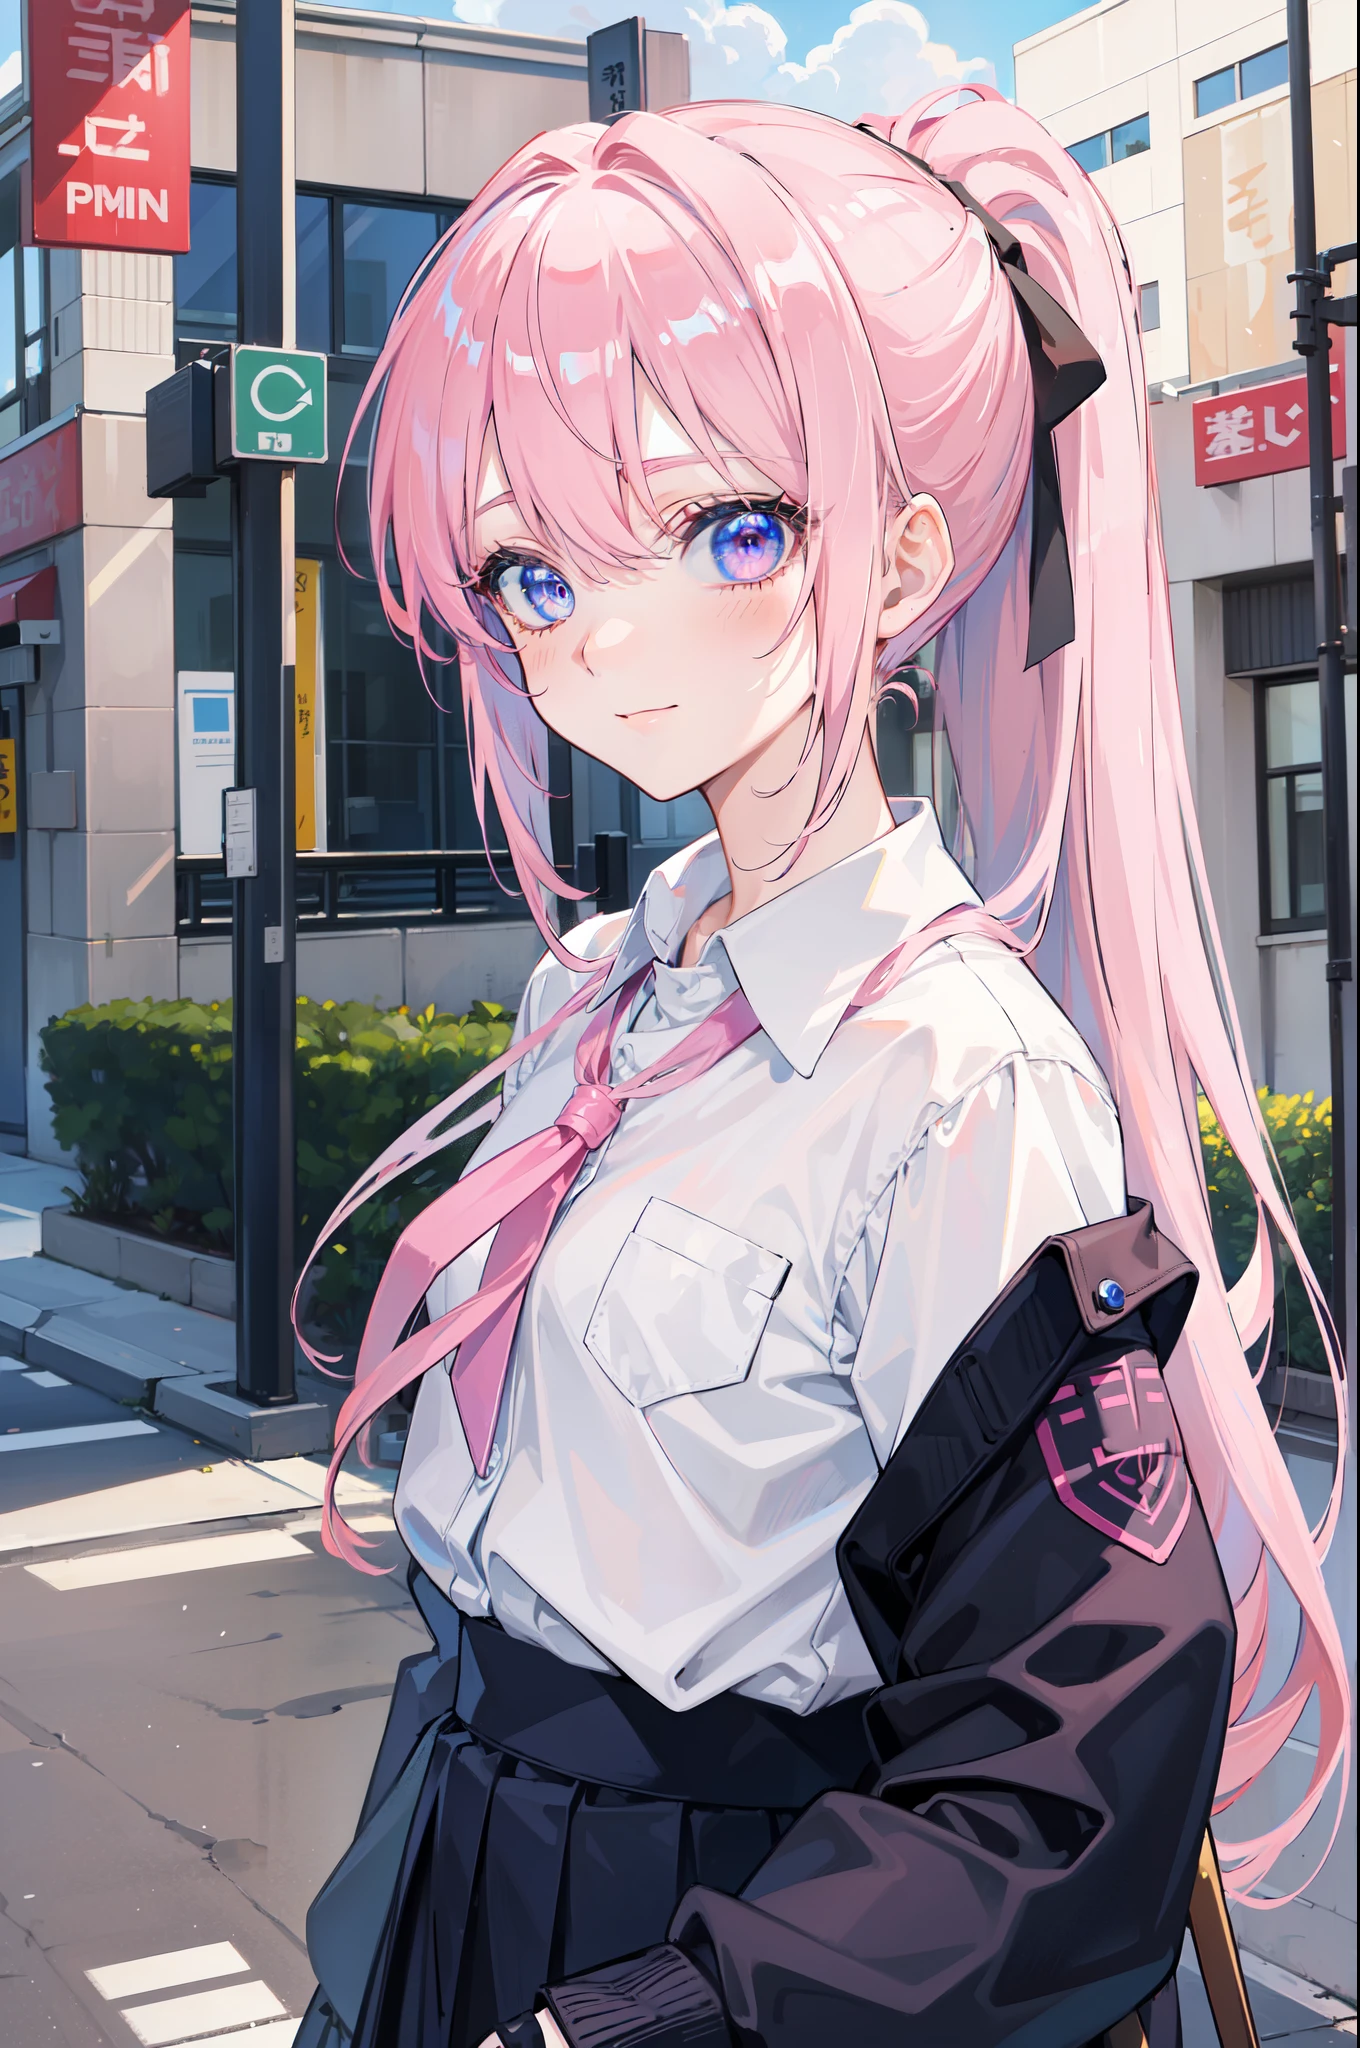 Anime girl with pink hair and blue eyes standing on a street 